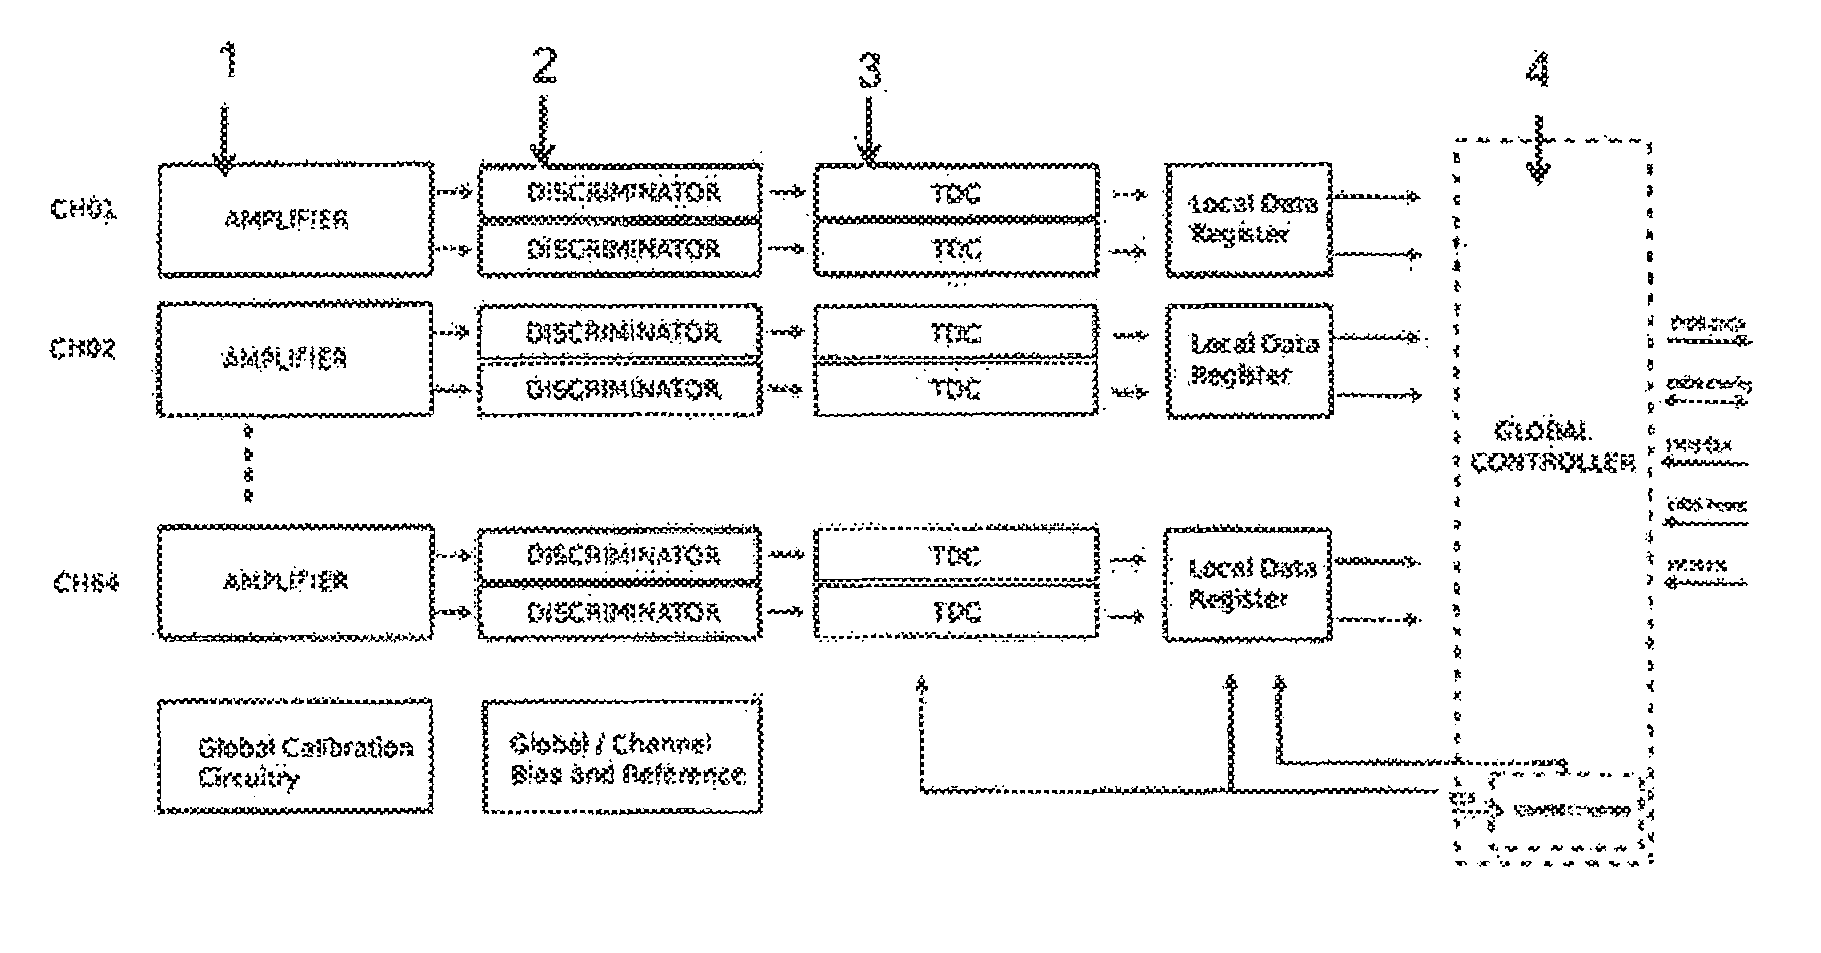 Reading device and method for measuring energy and flight time using silicon photomultipliers